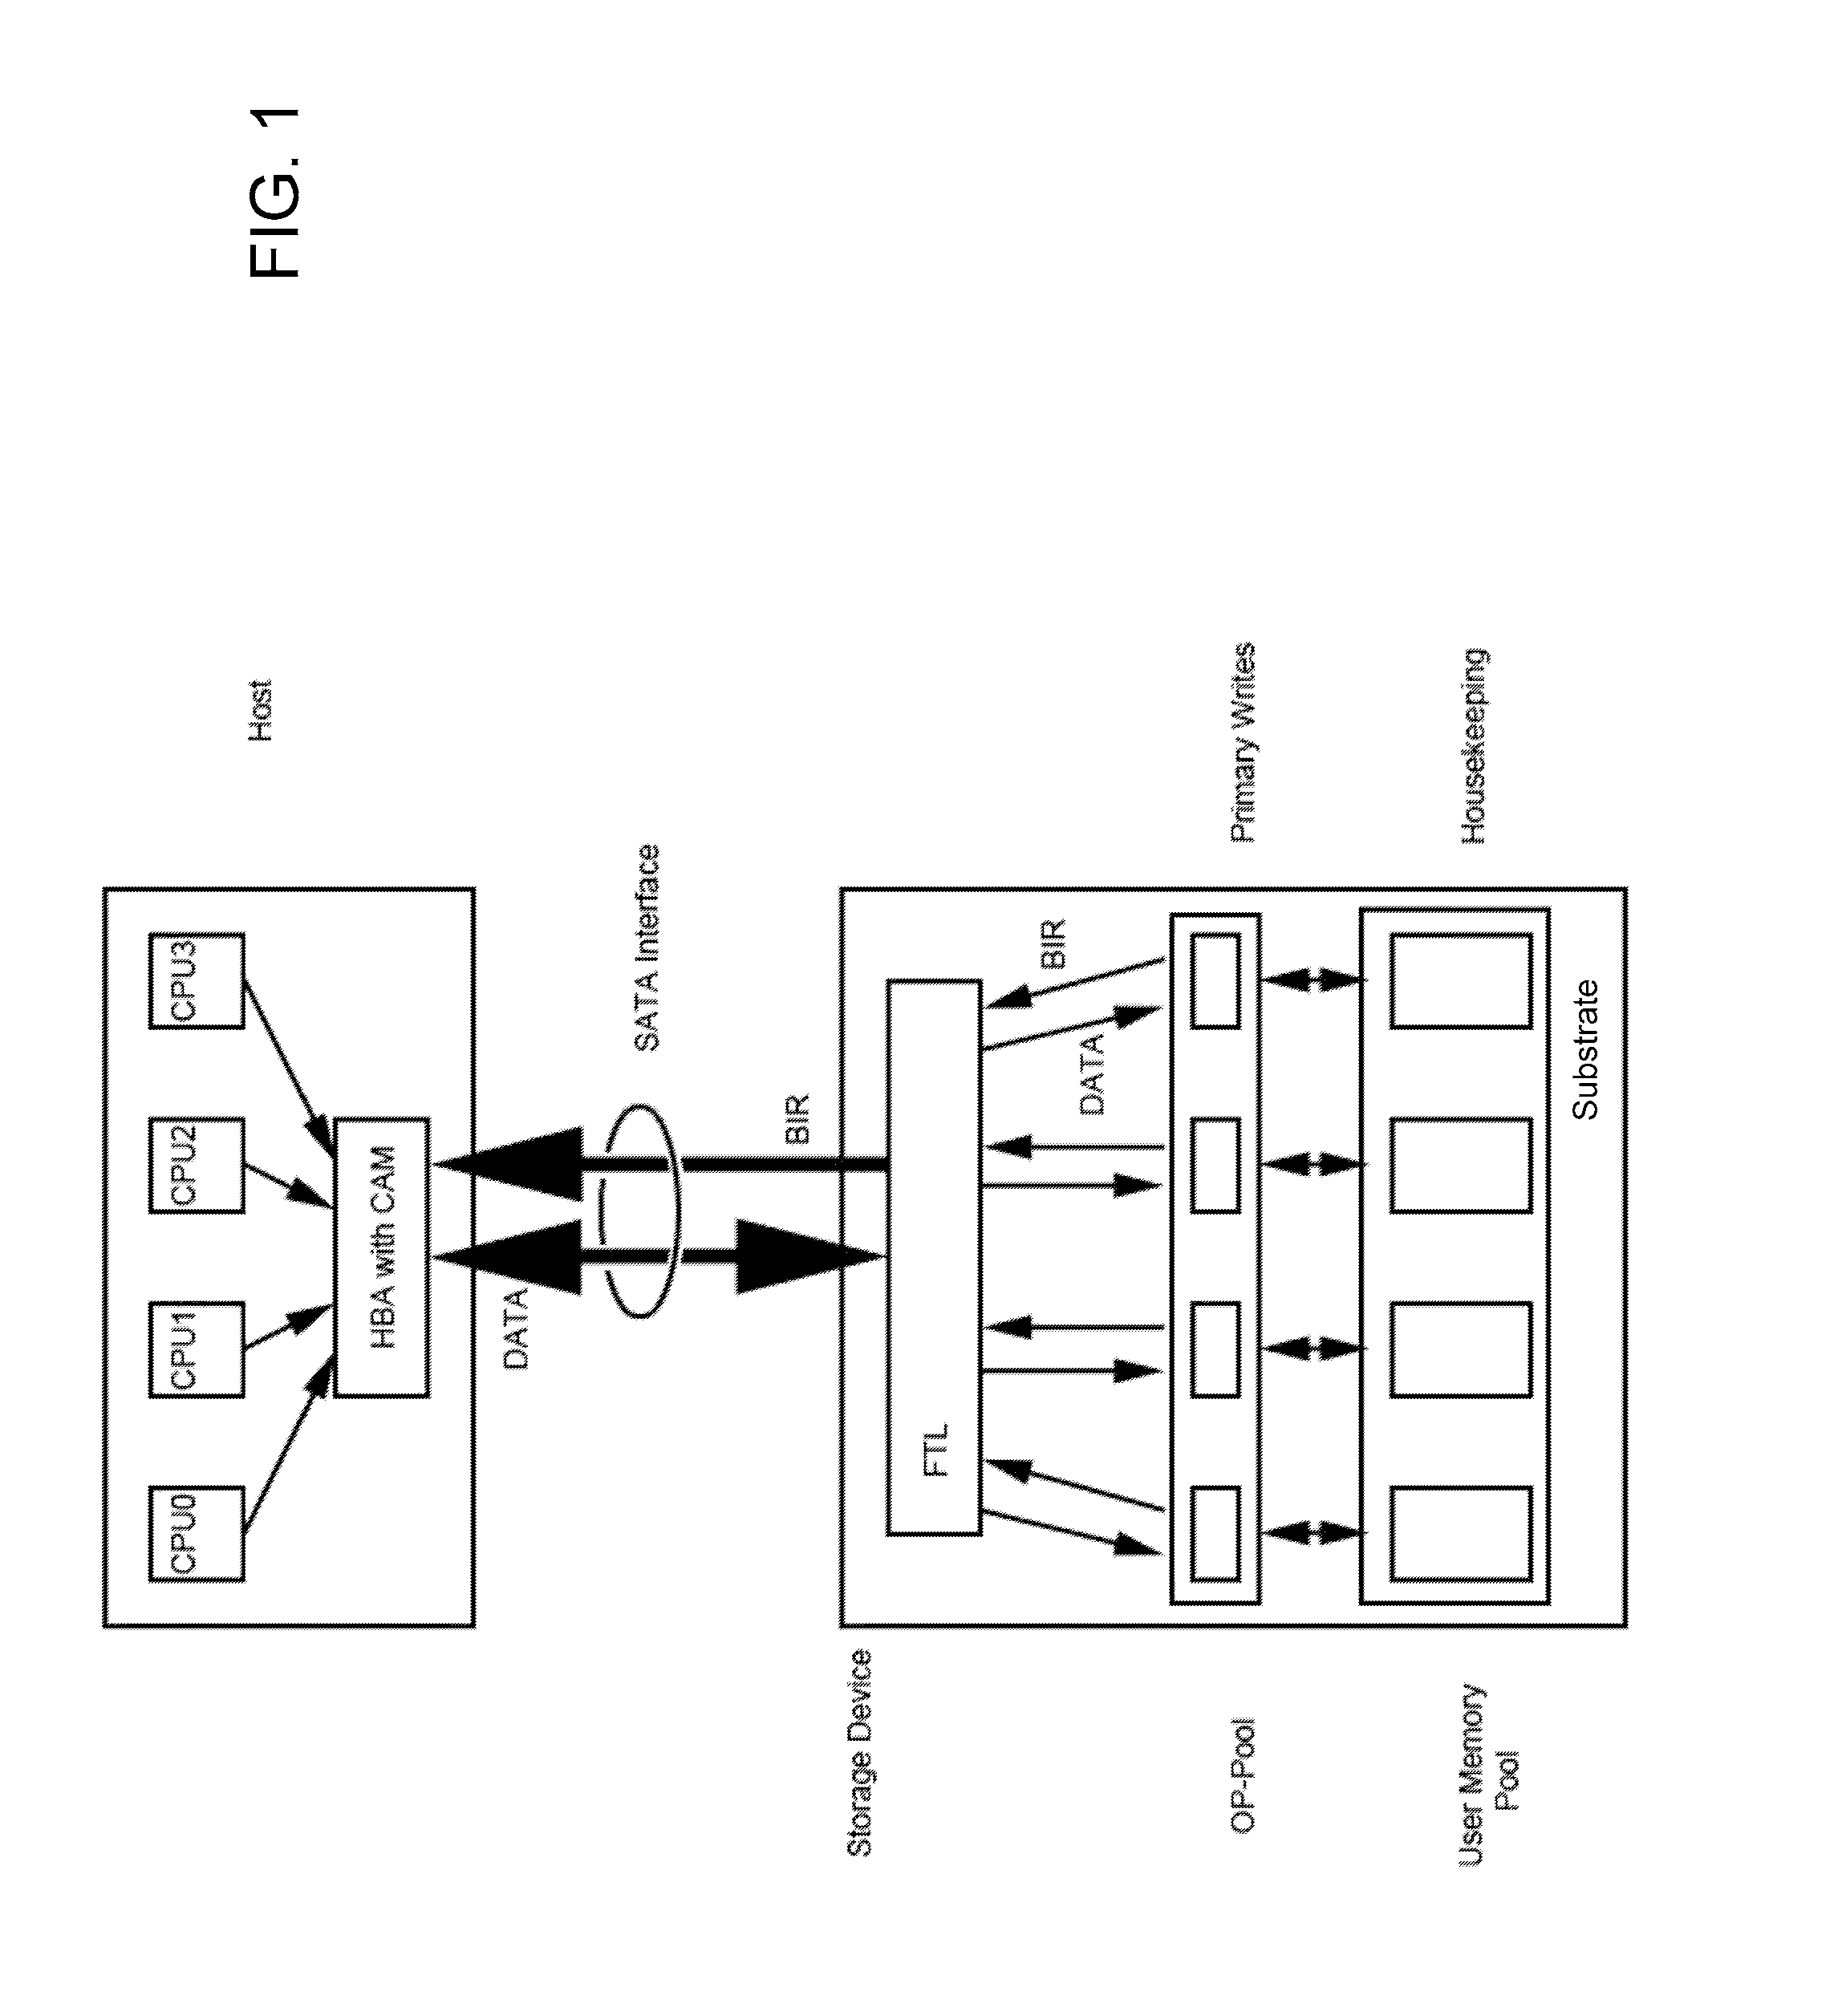 Non-volatile memory-based mass storage devices and methods for writing data thereto